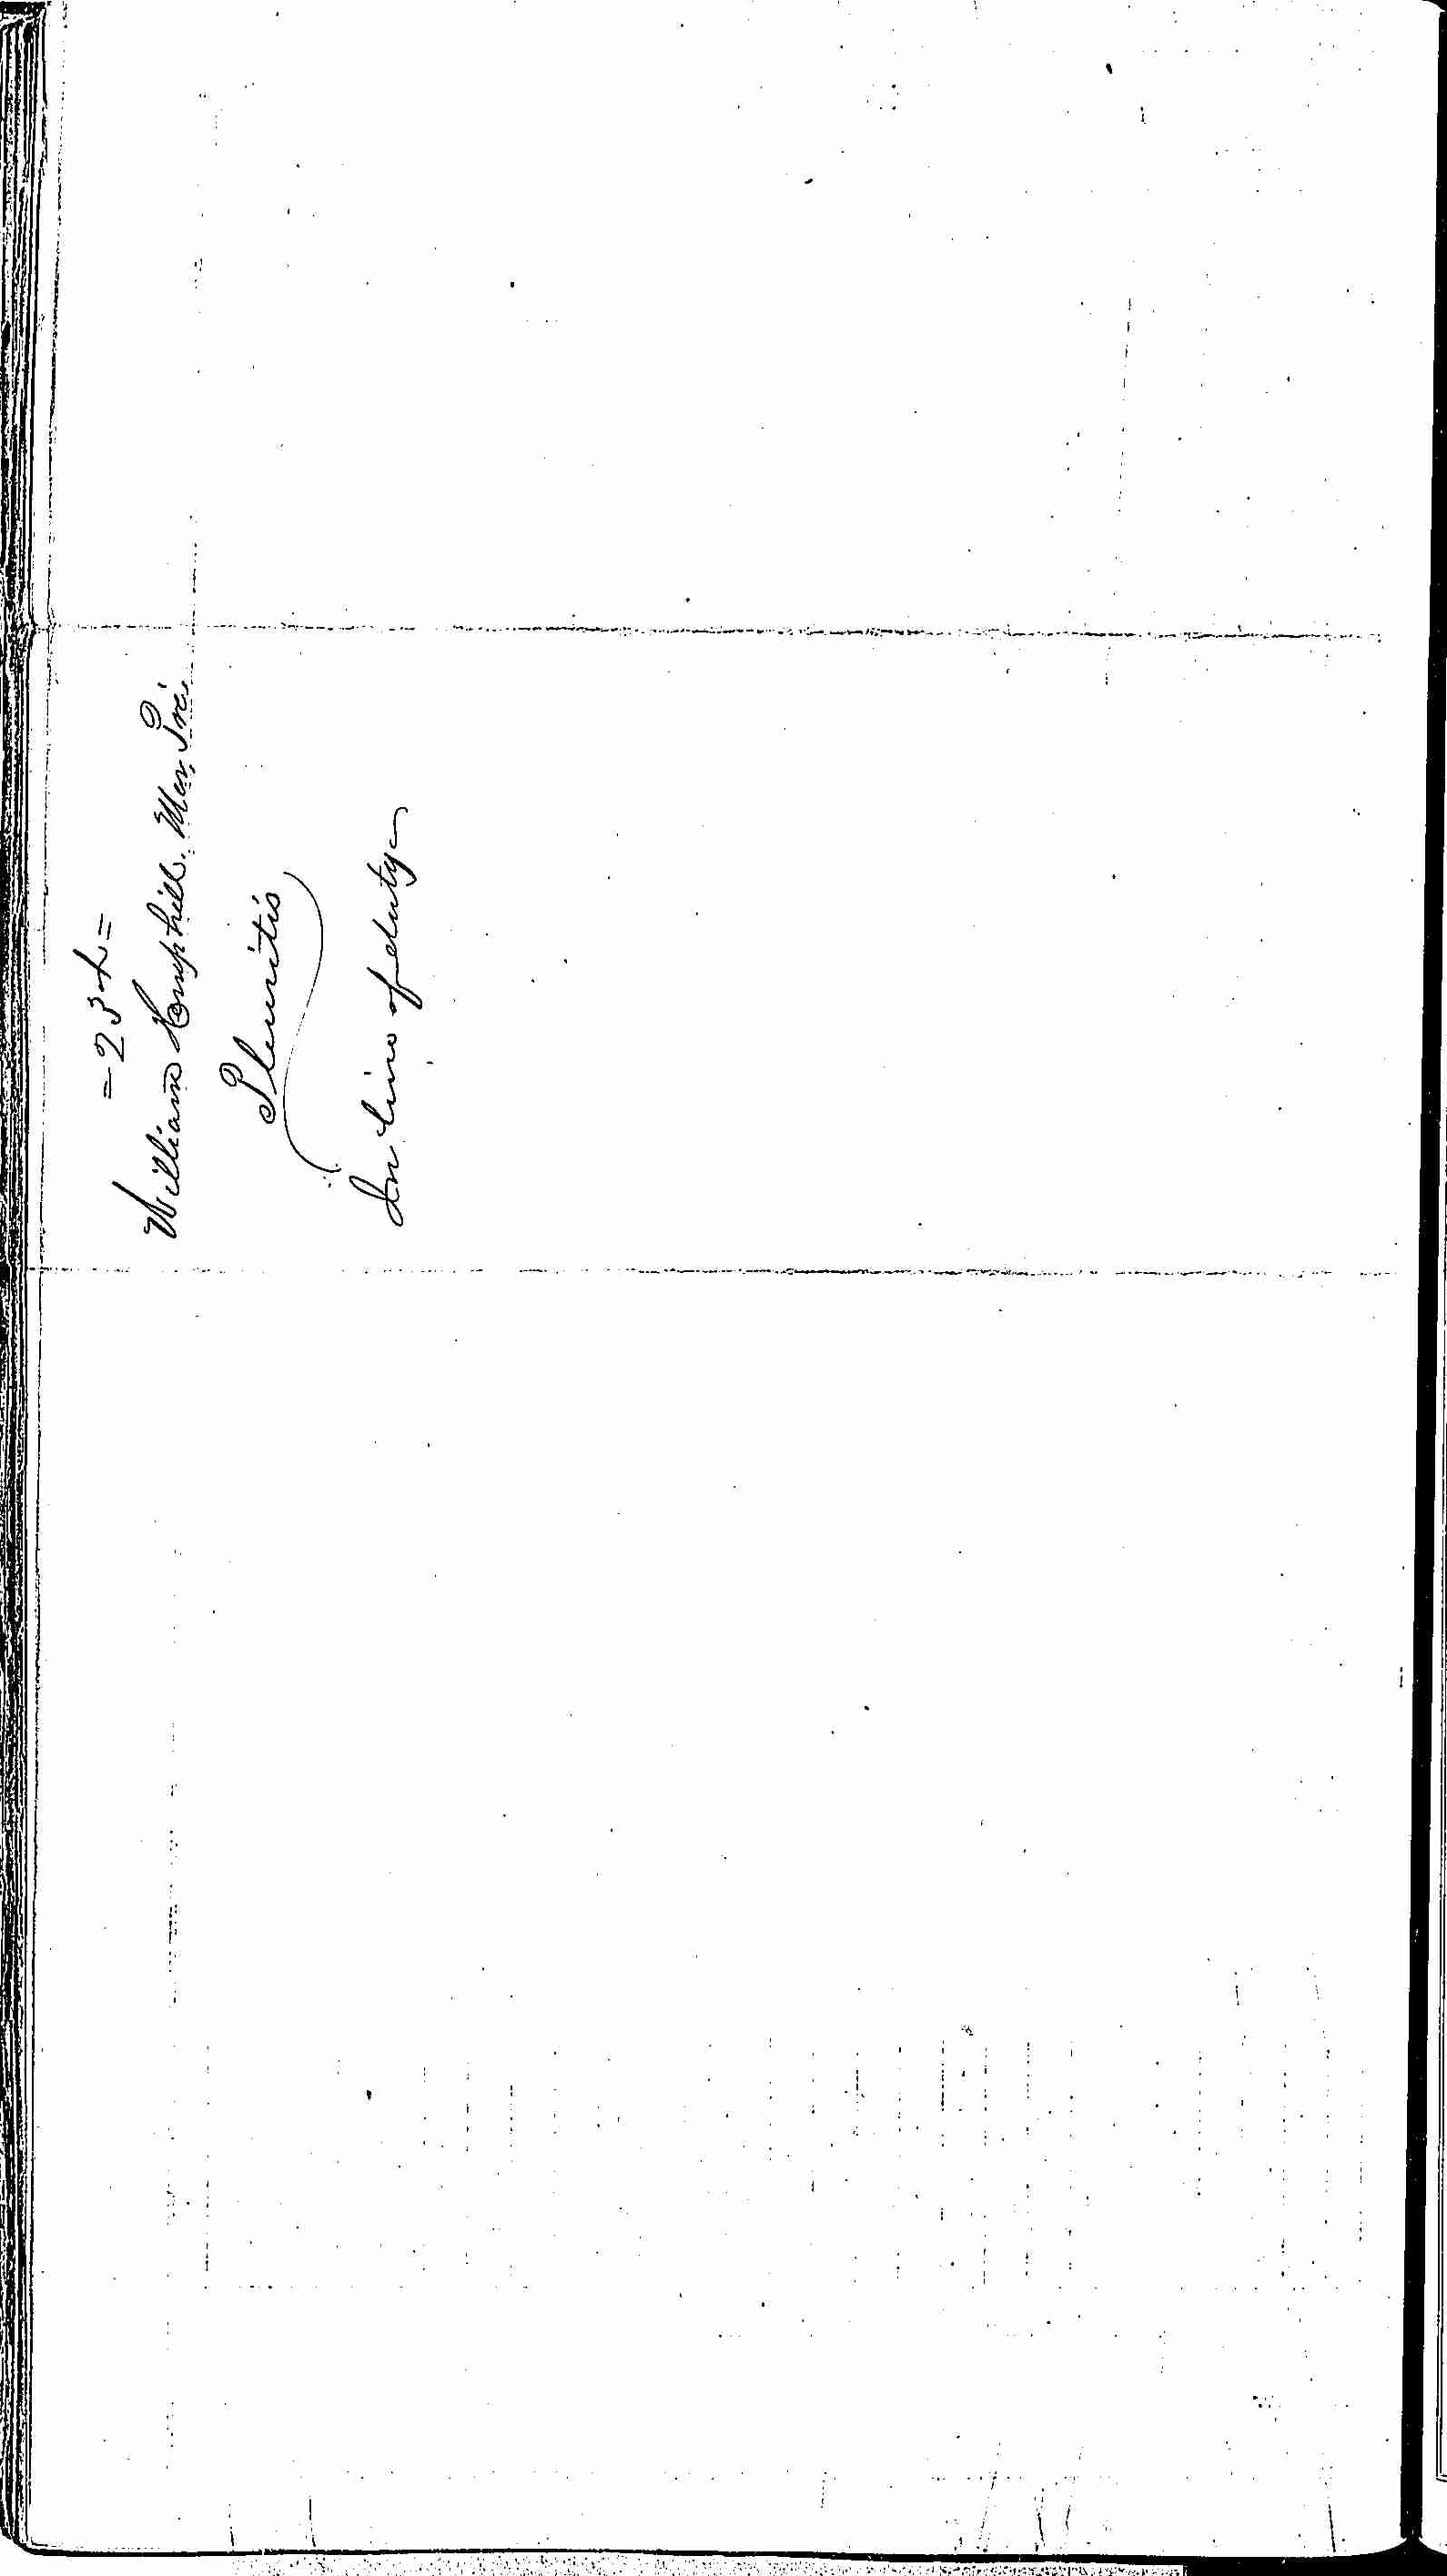 Entry for William Hempill (second admission page 2 of 2) in the log Hospital Tickets and Case Papers - Naval Hospital - Washington, D.C. - 1866-68